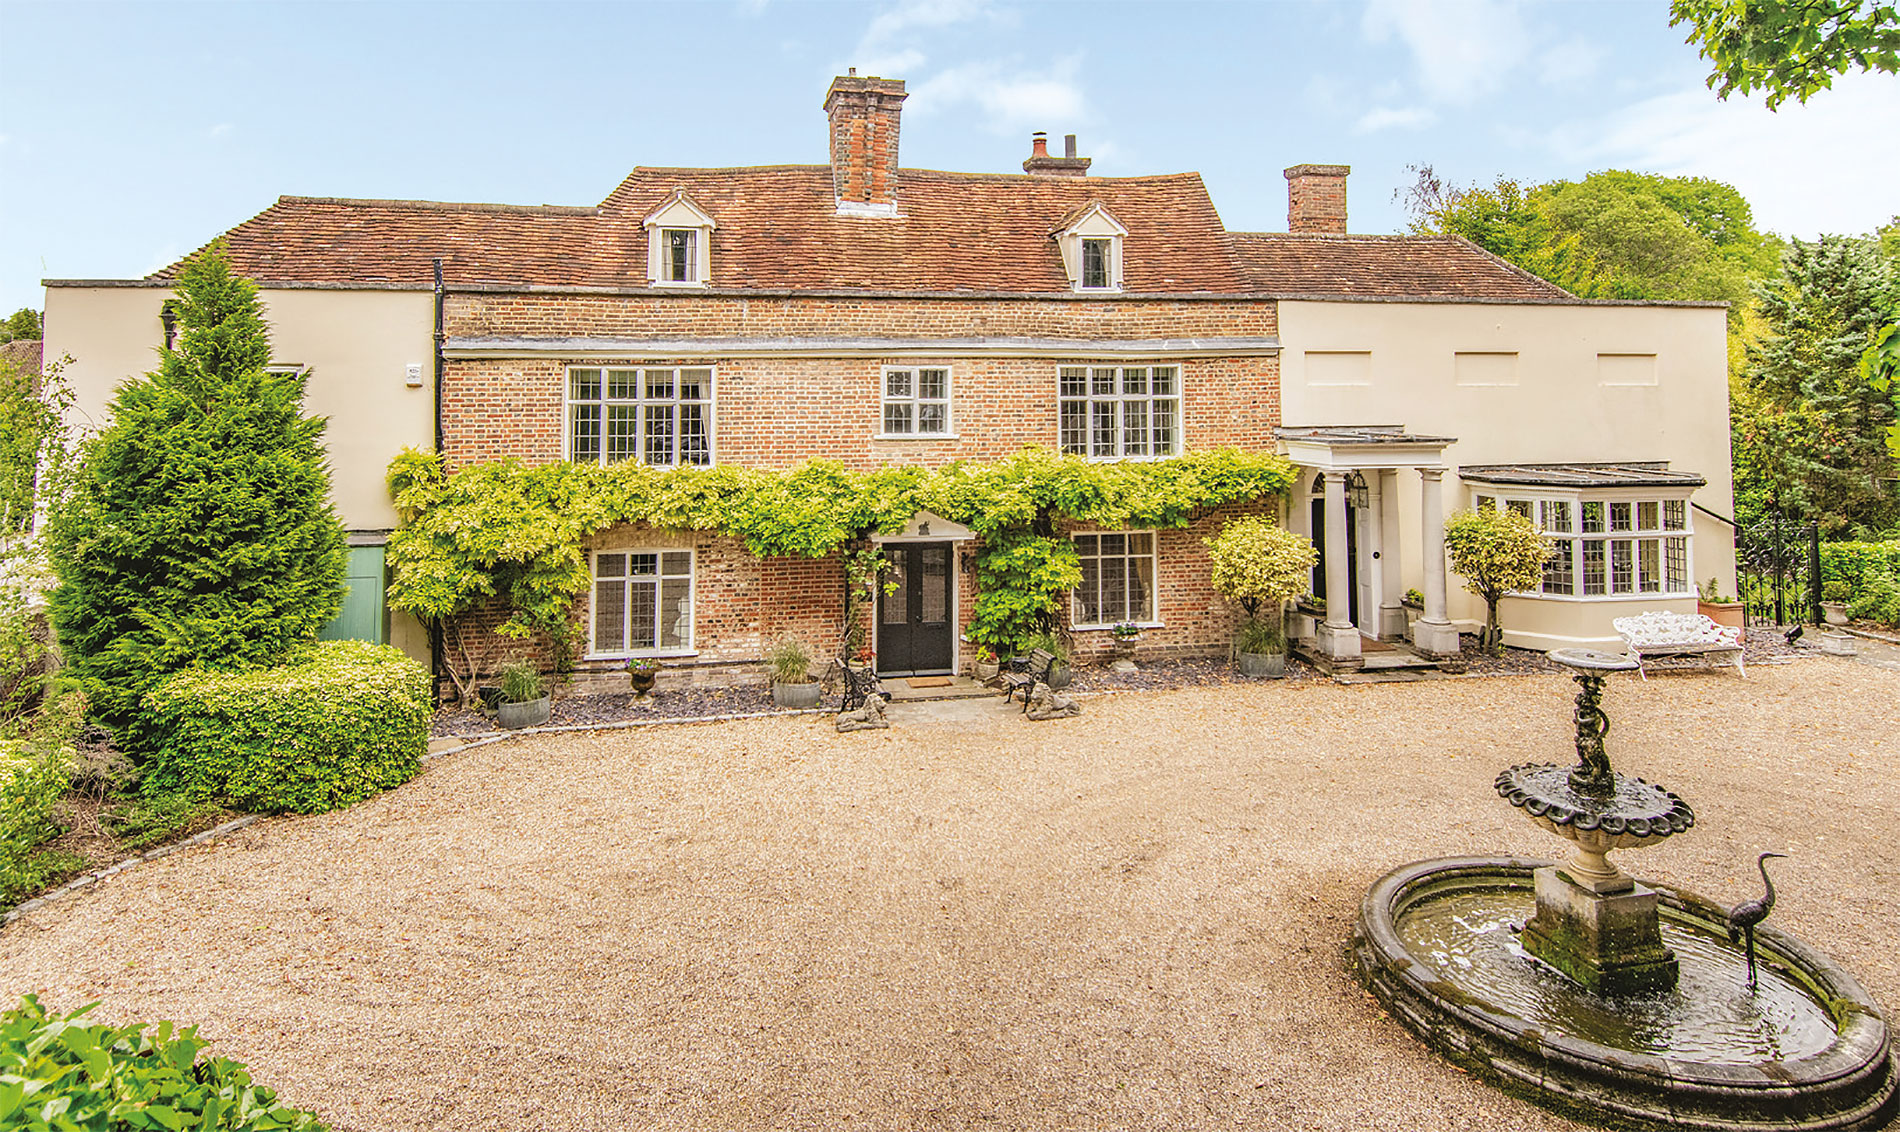 Five Breathtakingly Pretty Country Houses For Sale, As Seen In Country Life